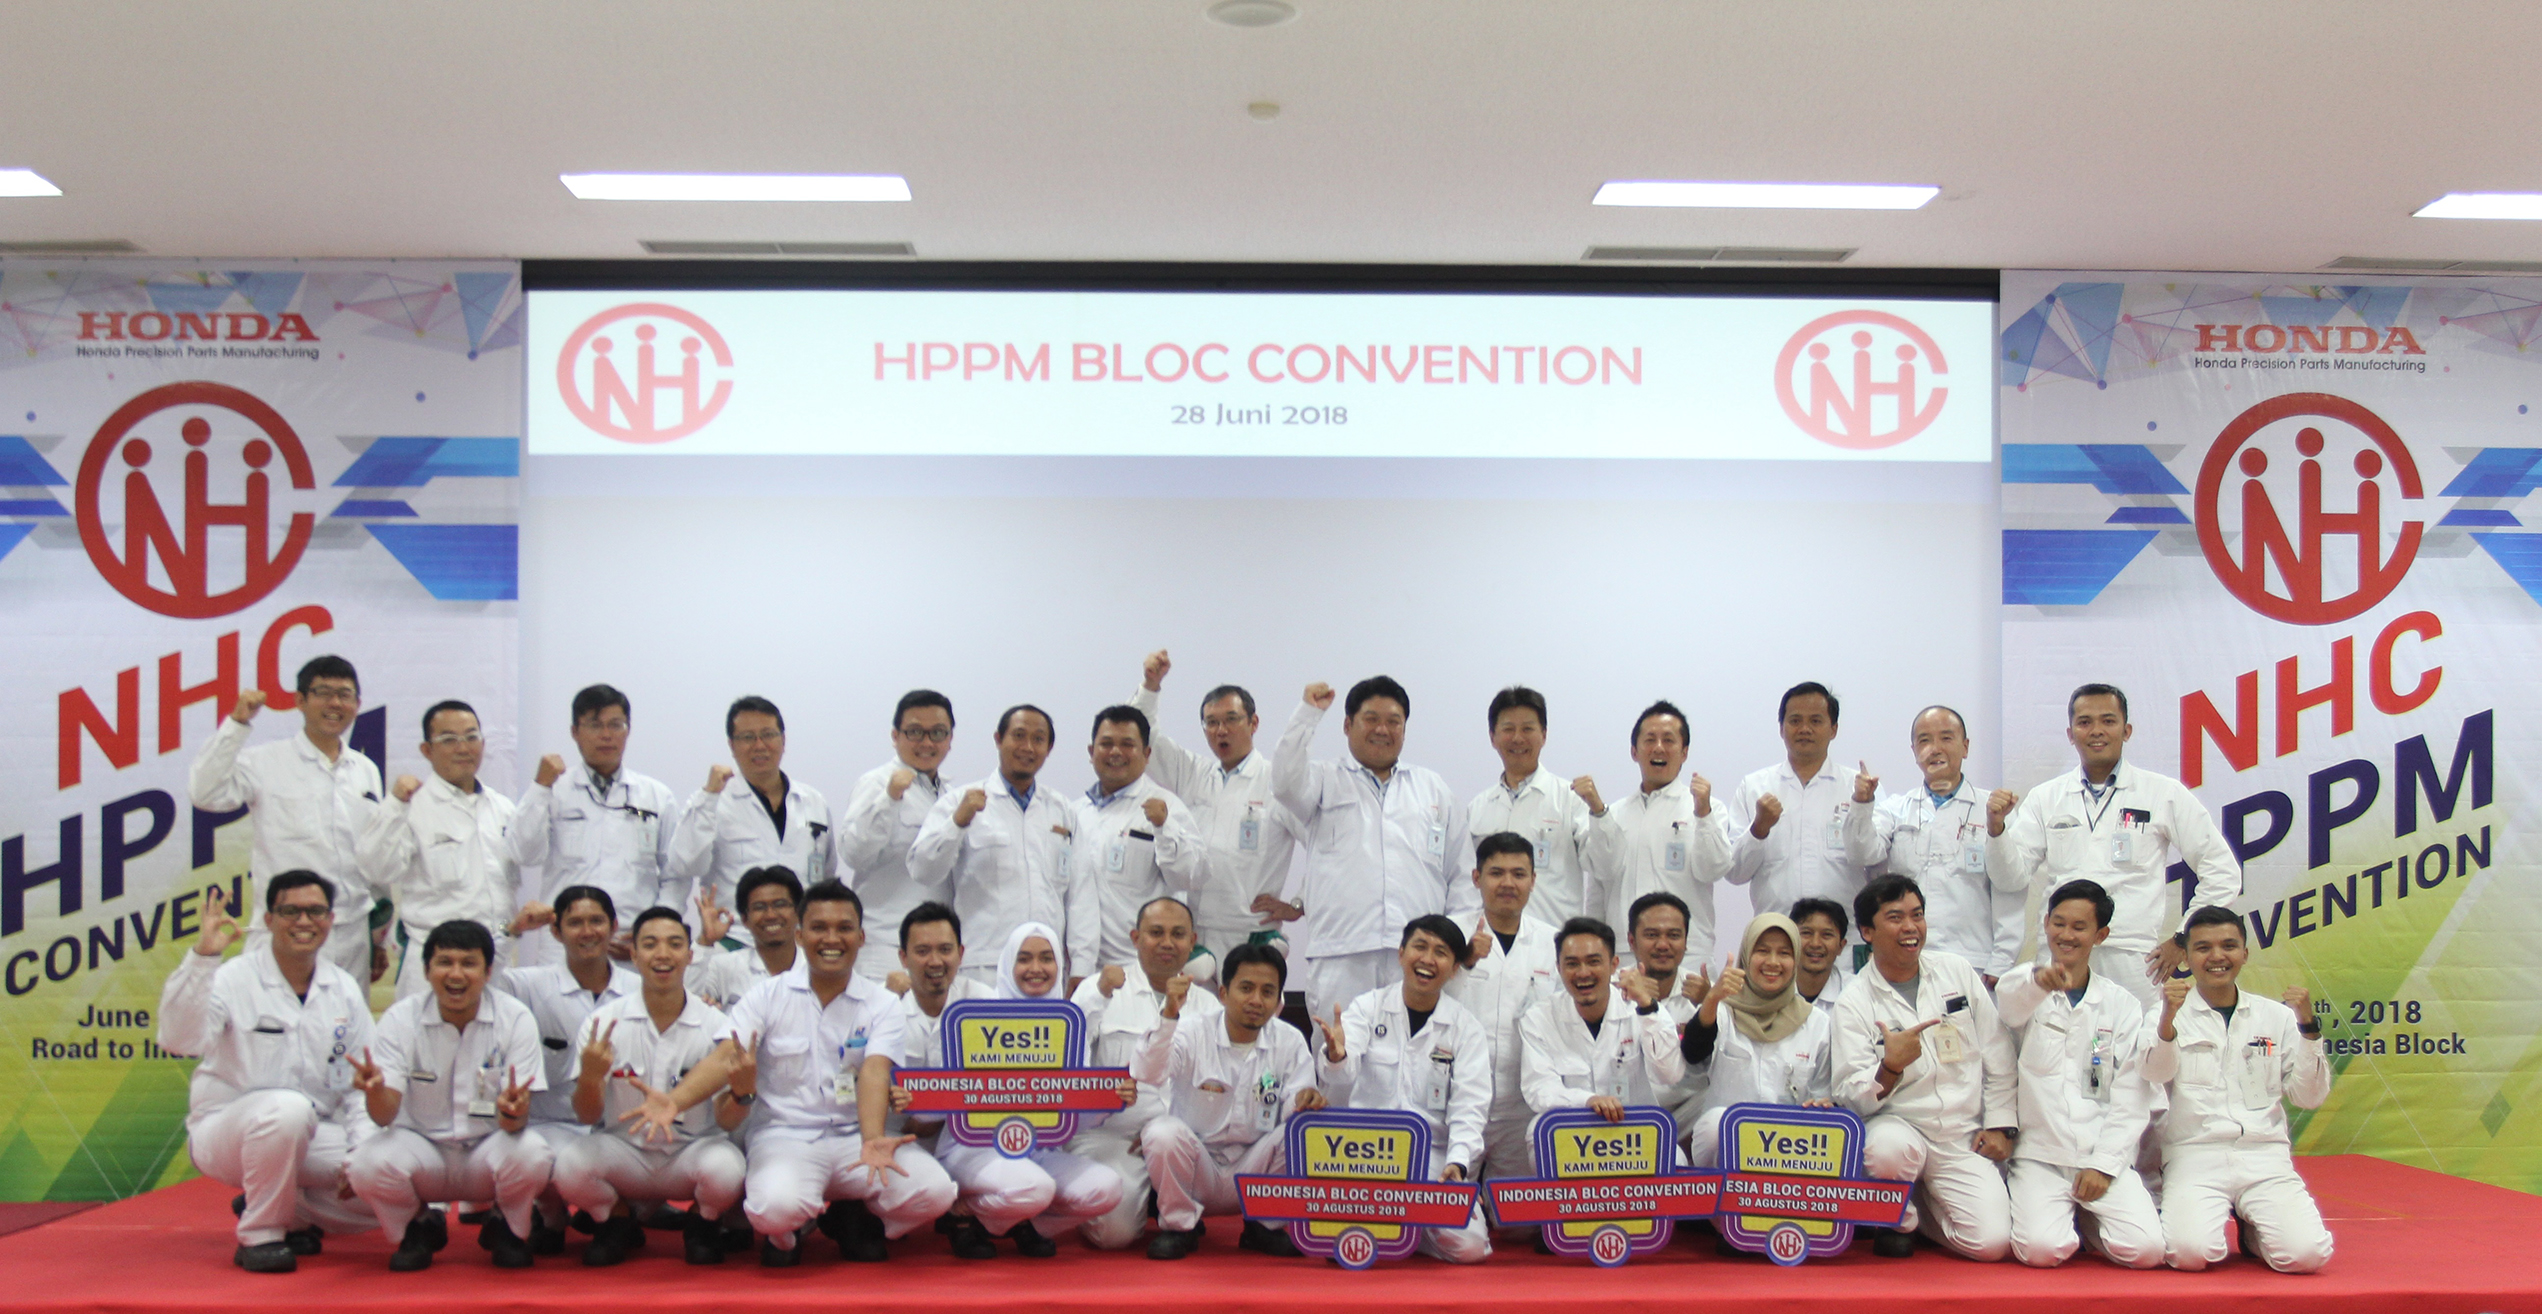 NHC HPPM Convention June 2018